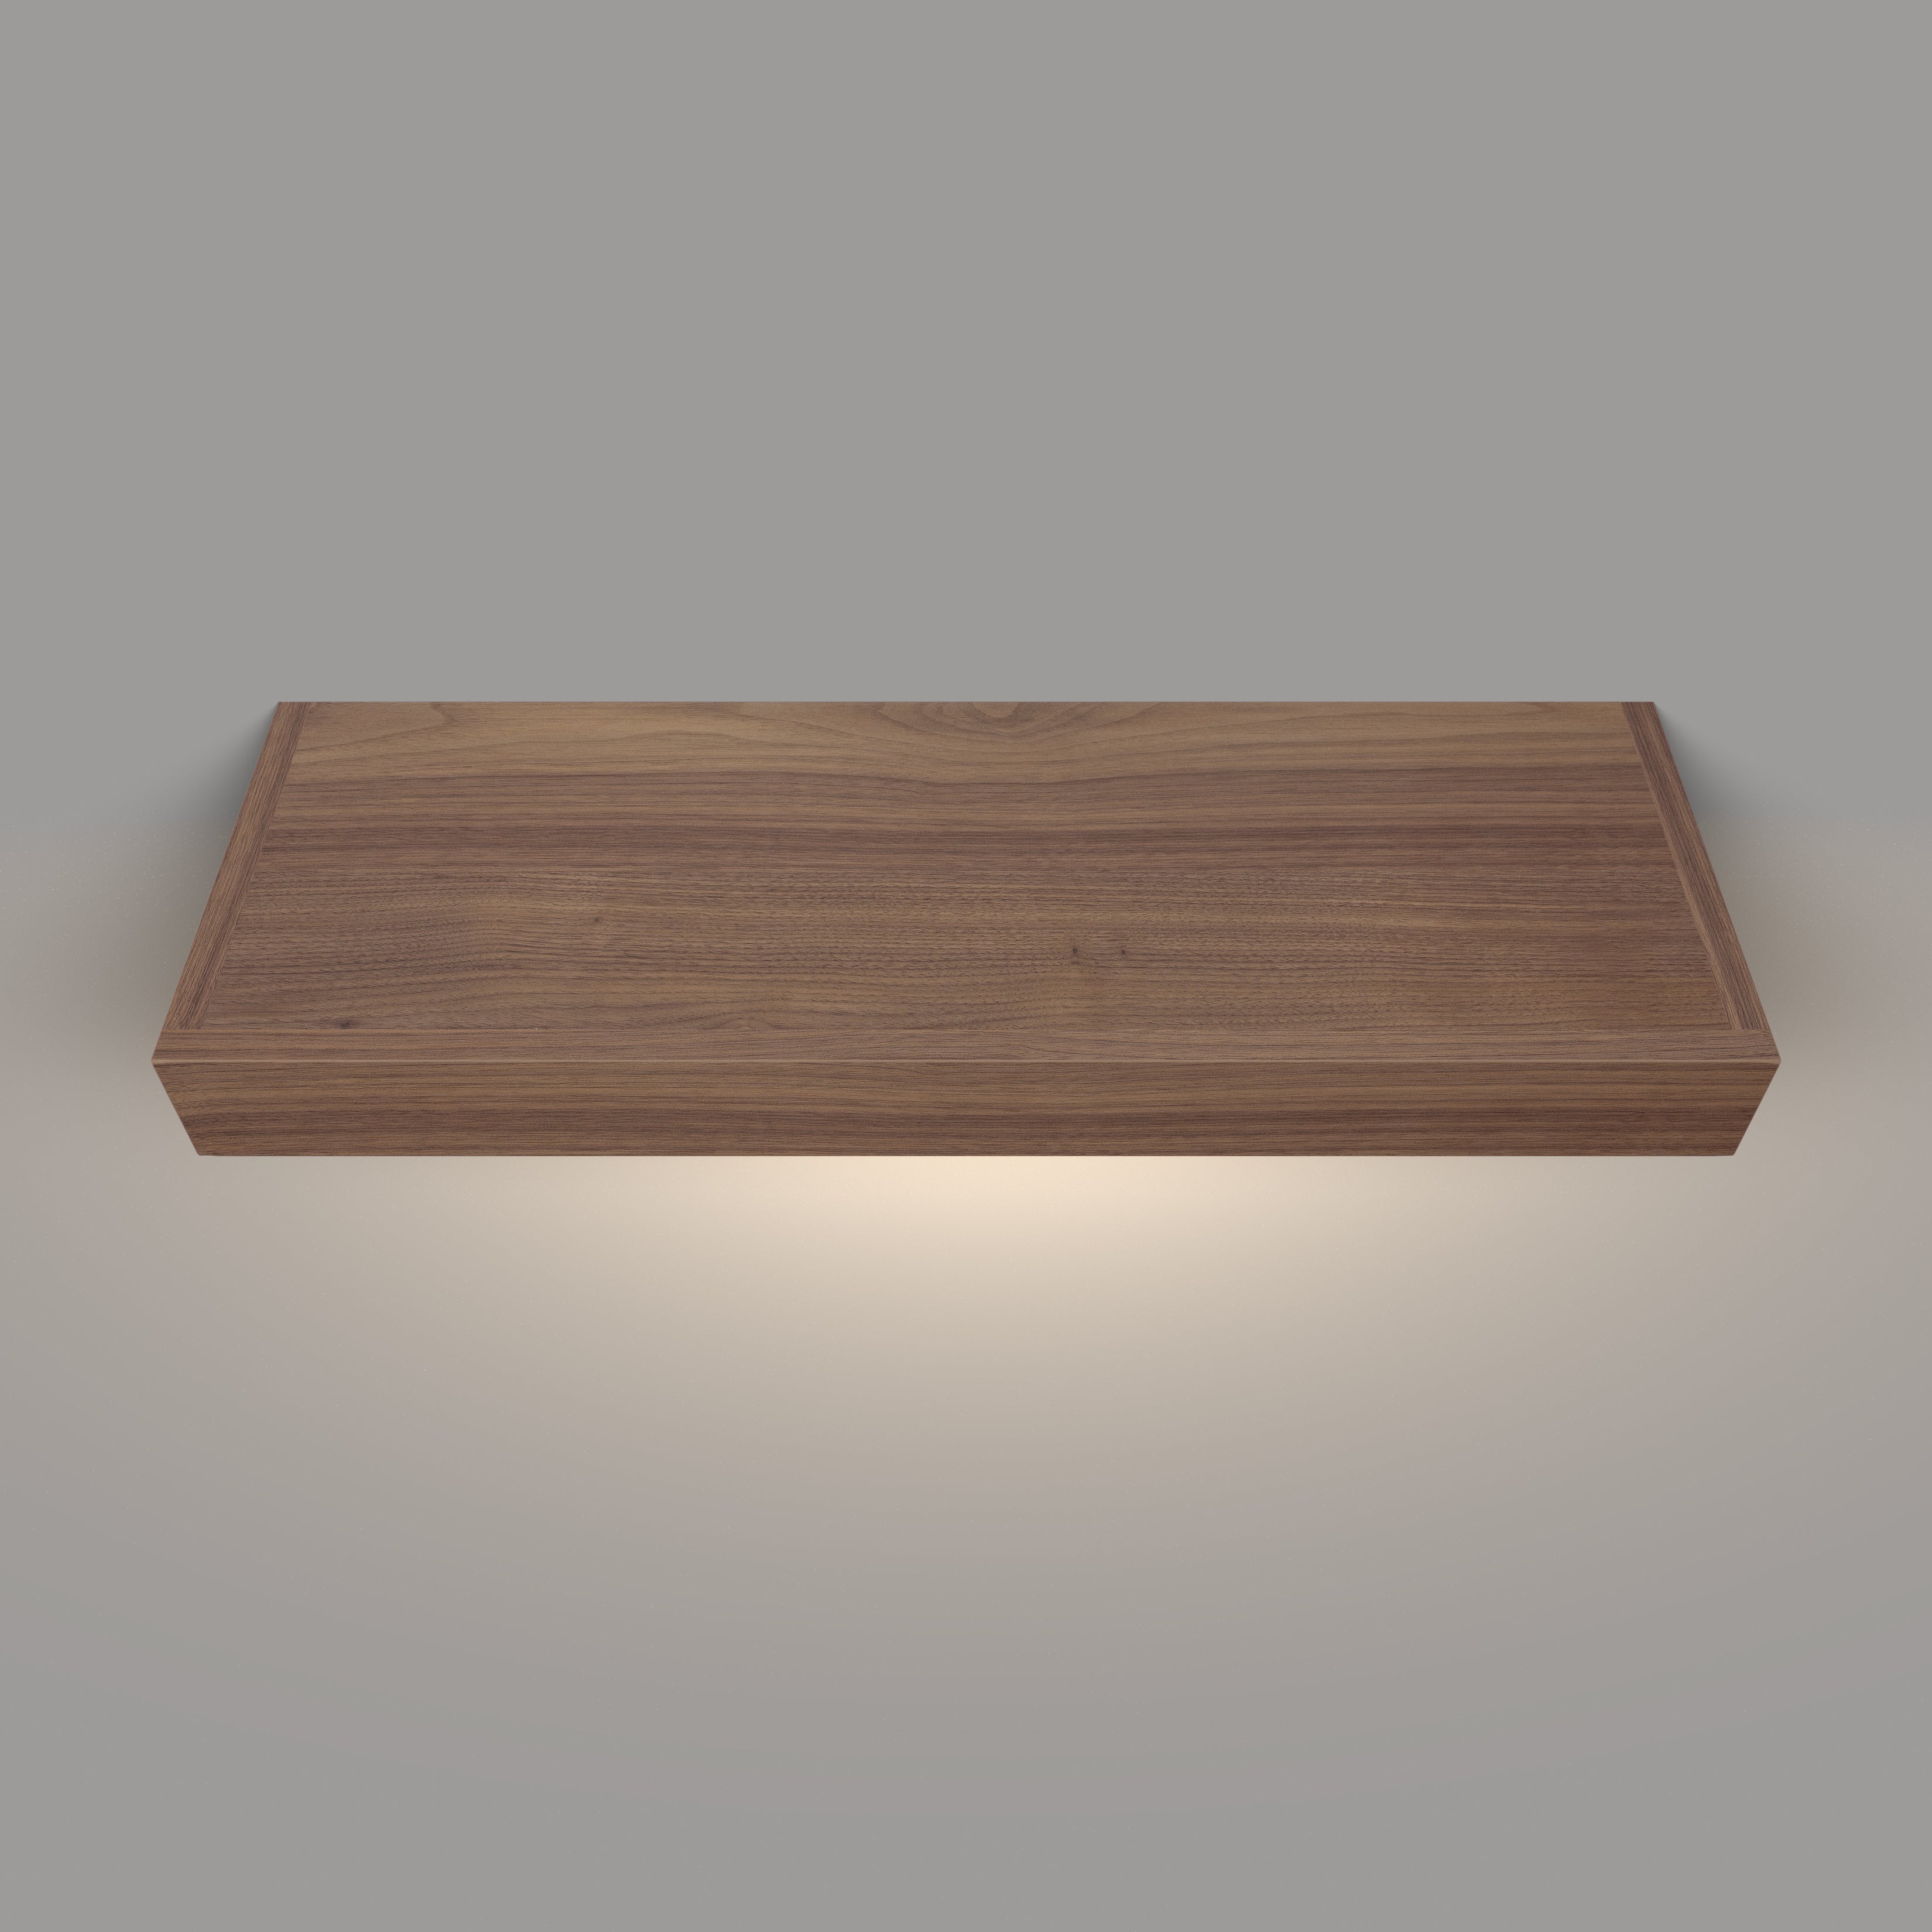 Walnut 3 Inch Thick LED Lighted Floating Shelf - Battery